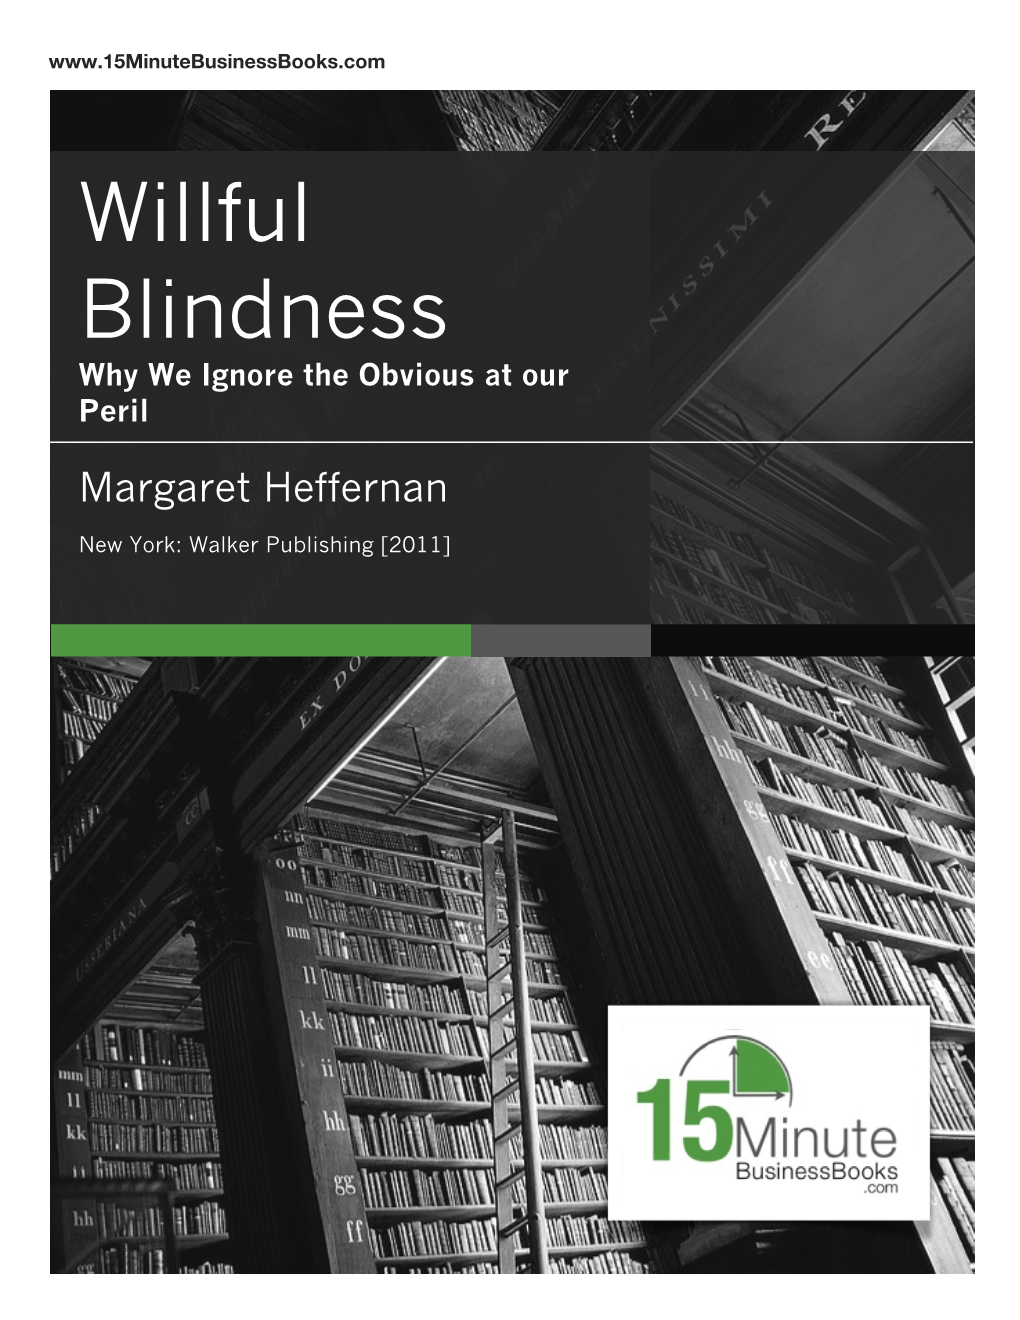 Willful Blindness Is That It Carries No Implication That the Avoidance of the Here Are Some Key Quotes from Truth Is Conscious